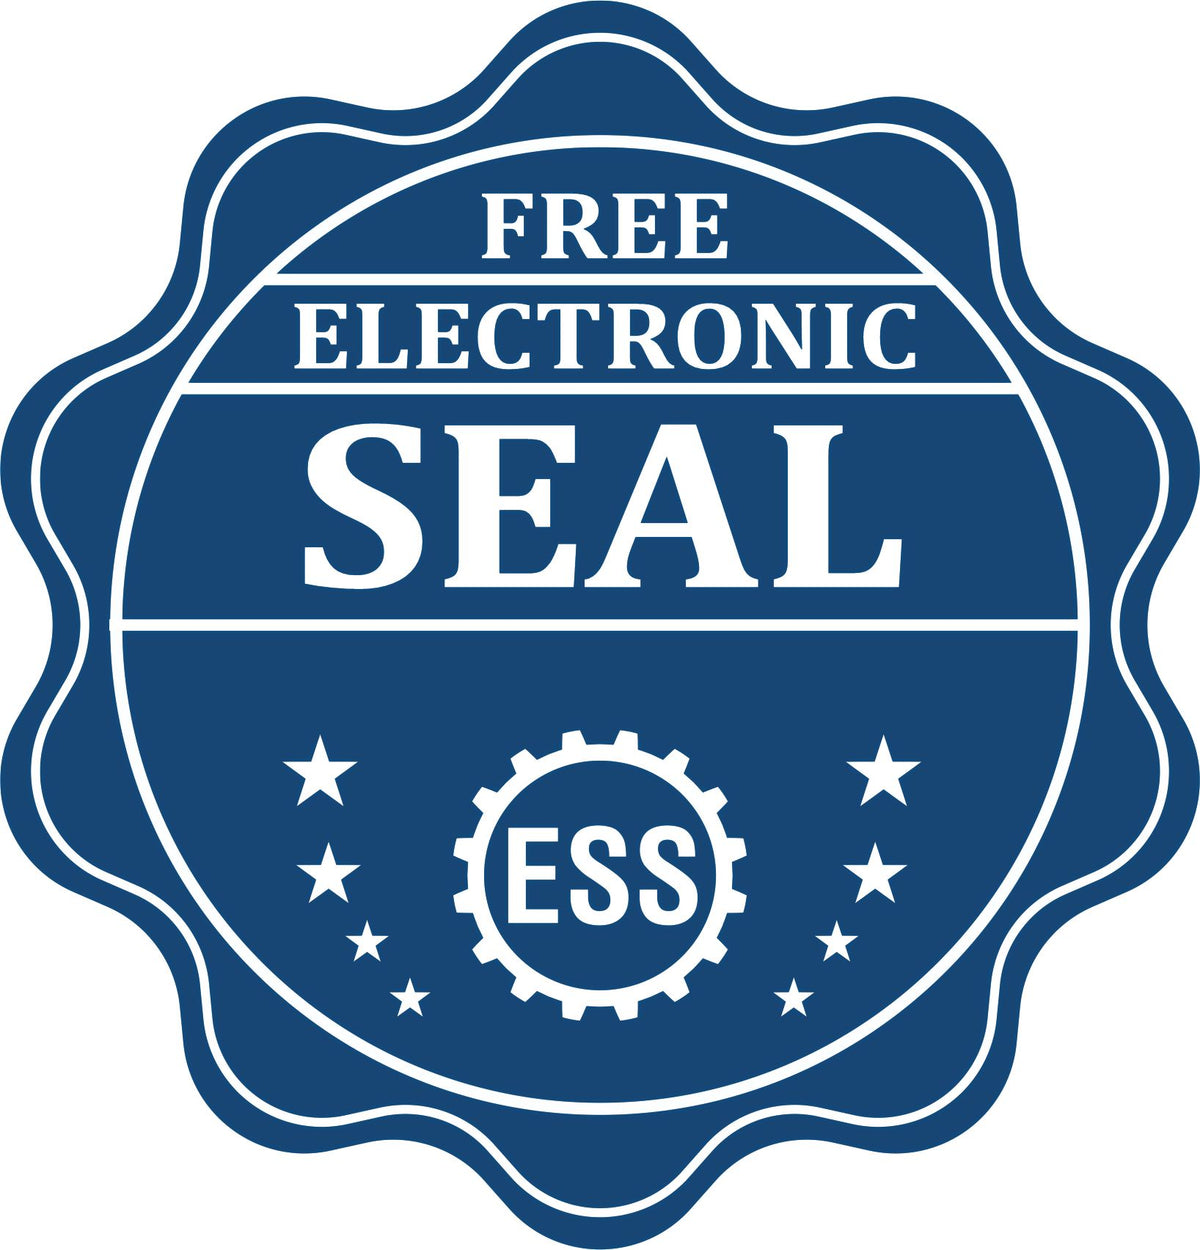 A badge showing a free electronic seal for the Slim Pre-Inked Oklahoma Professional Geologist Seal Stamp with stars and the ESS gear on the emblem.